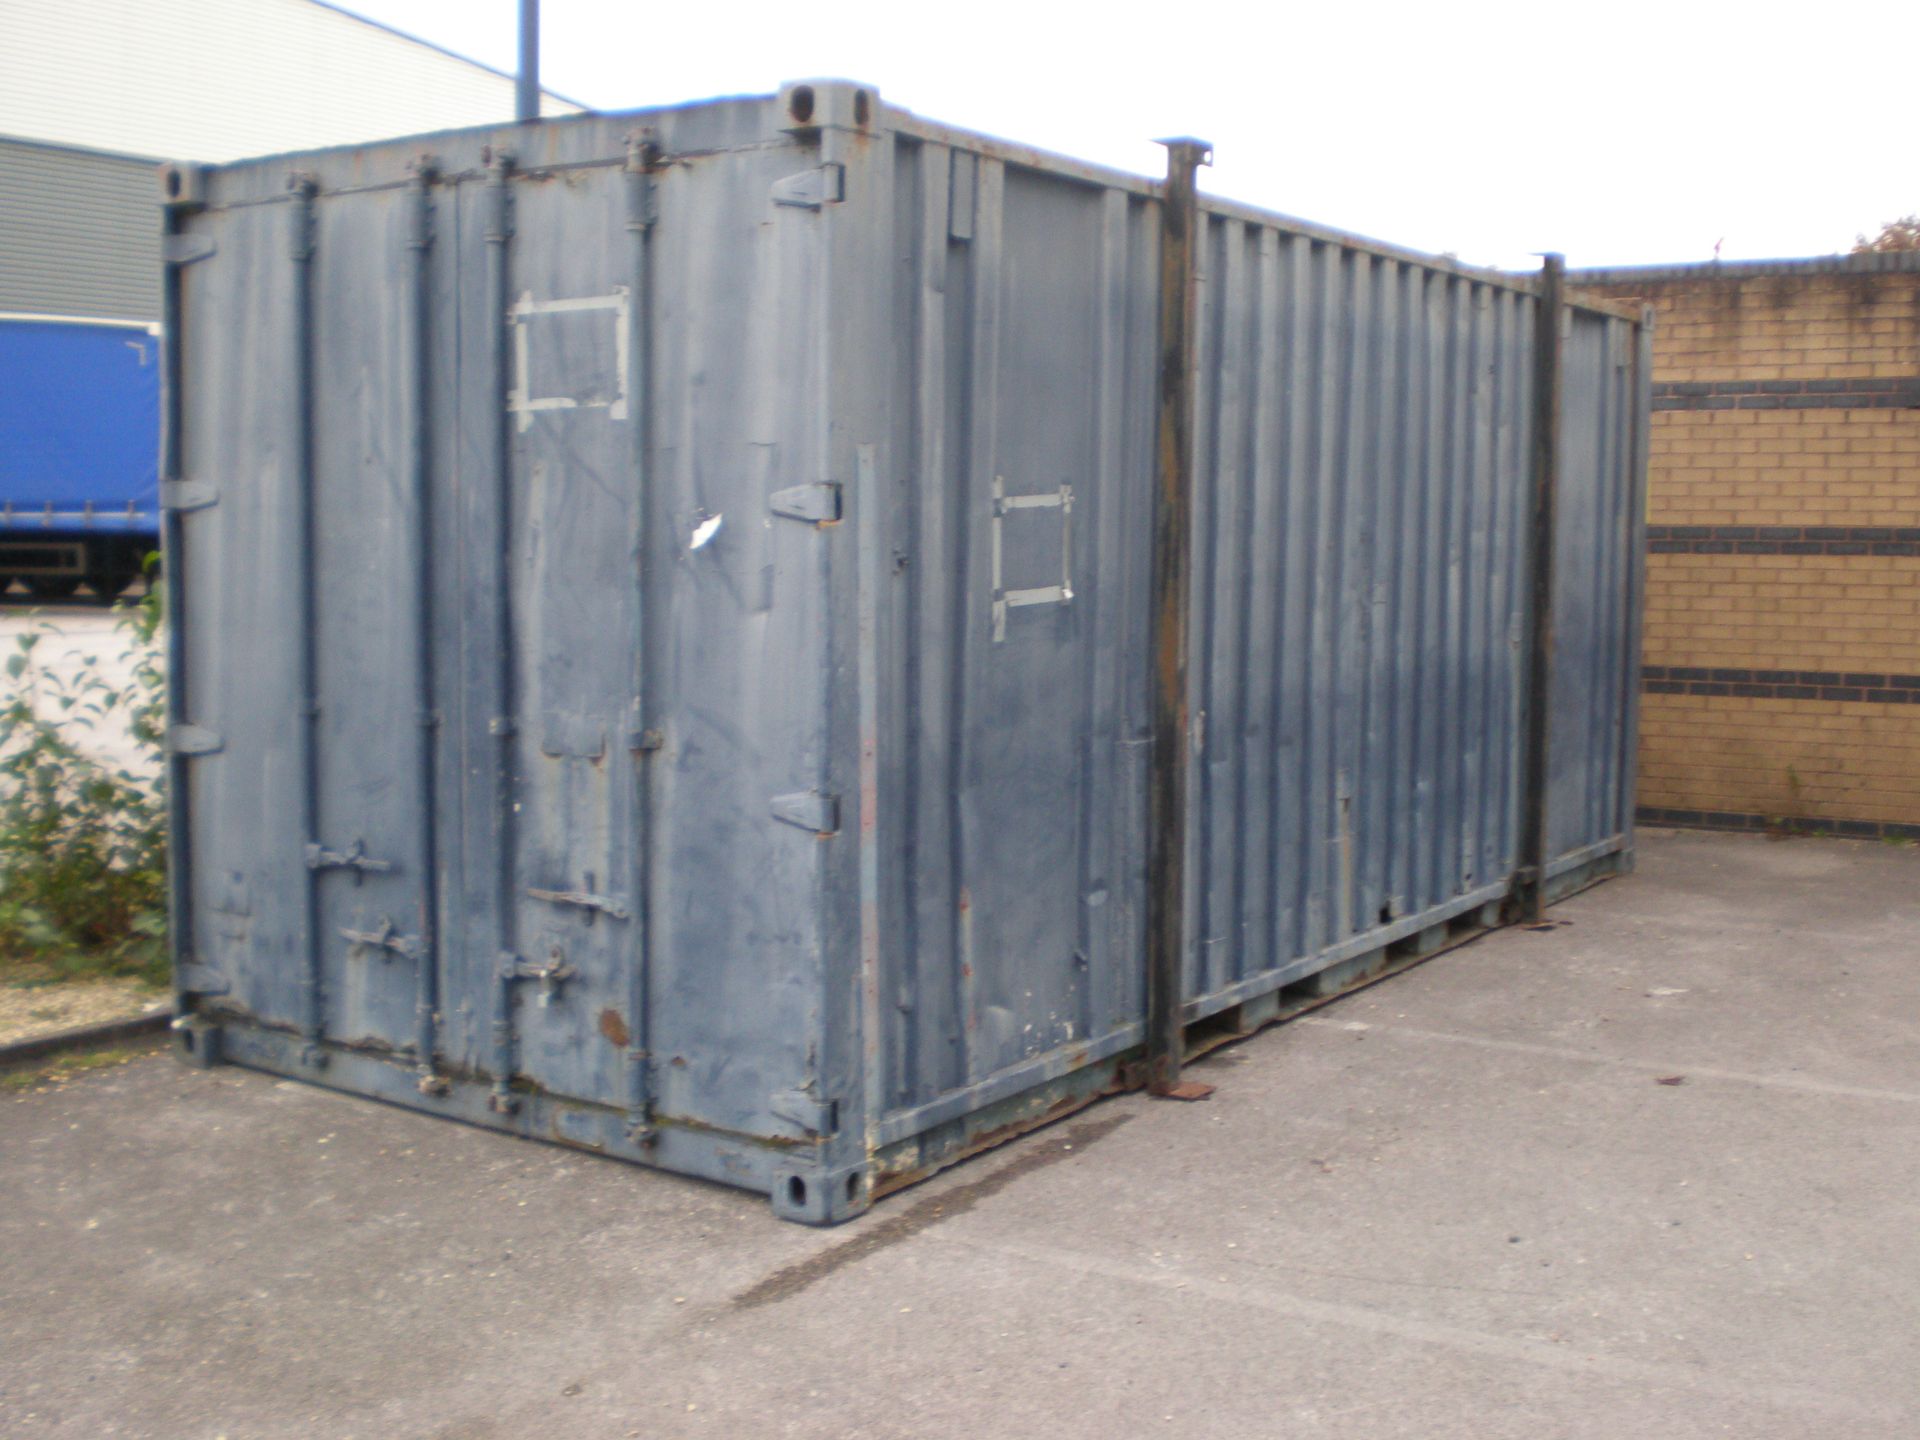 20 Foot Jack Leg Shipping Container With Light And Work Becnh Inside - Image 4 of 5